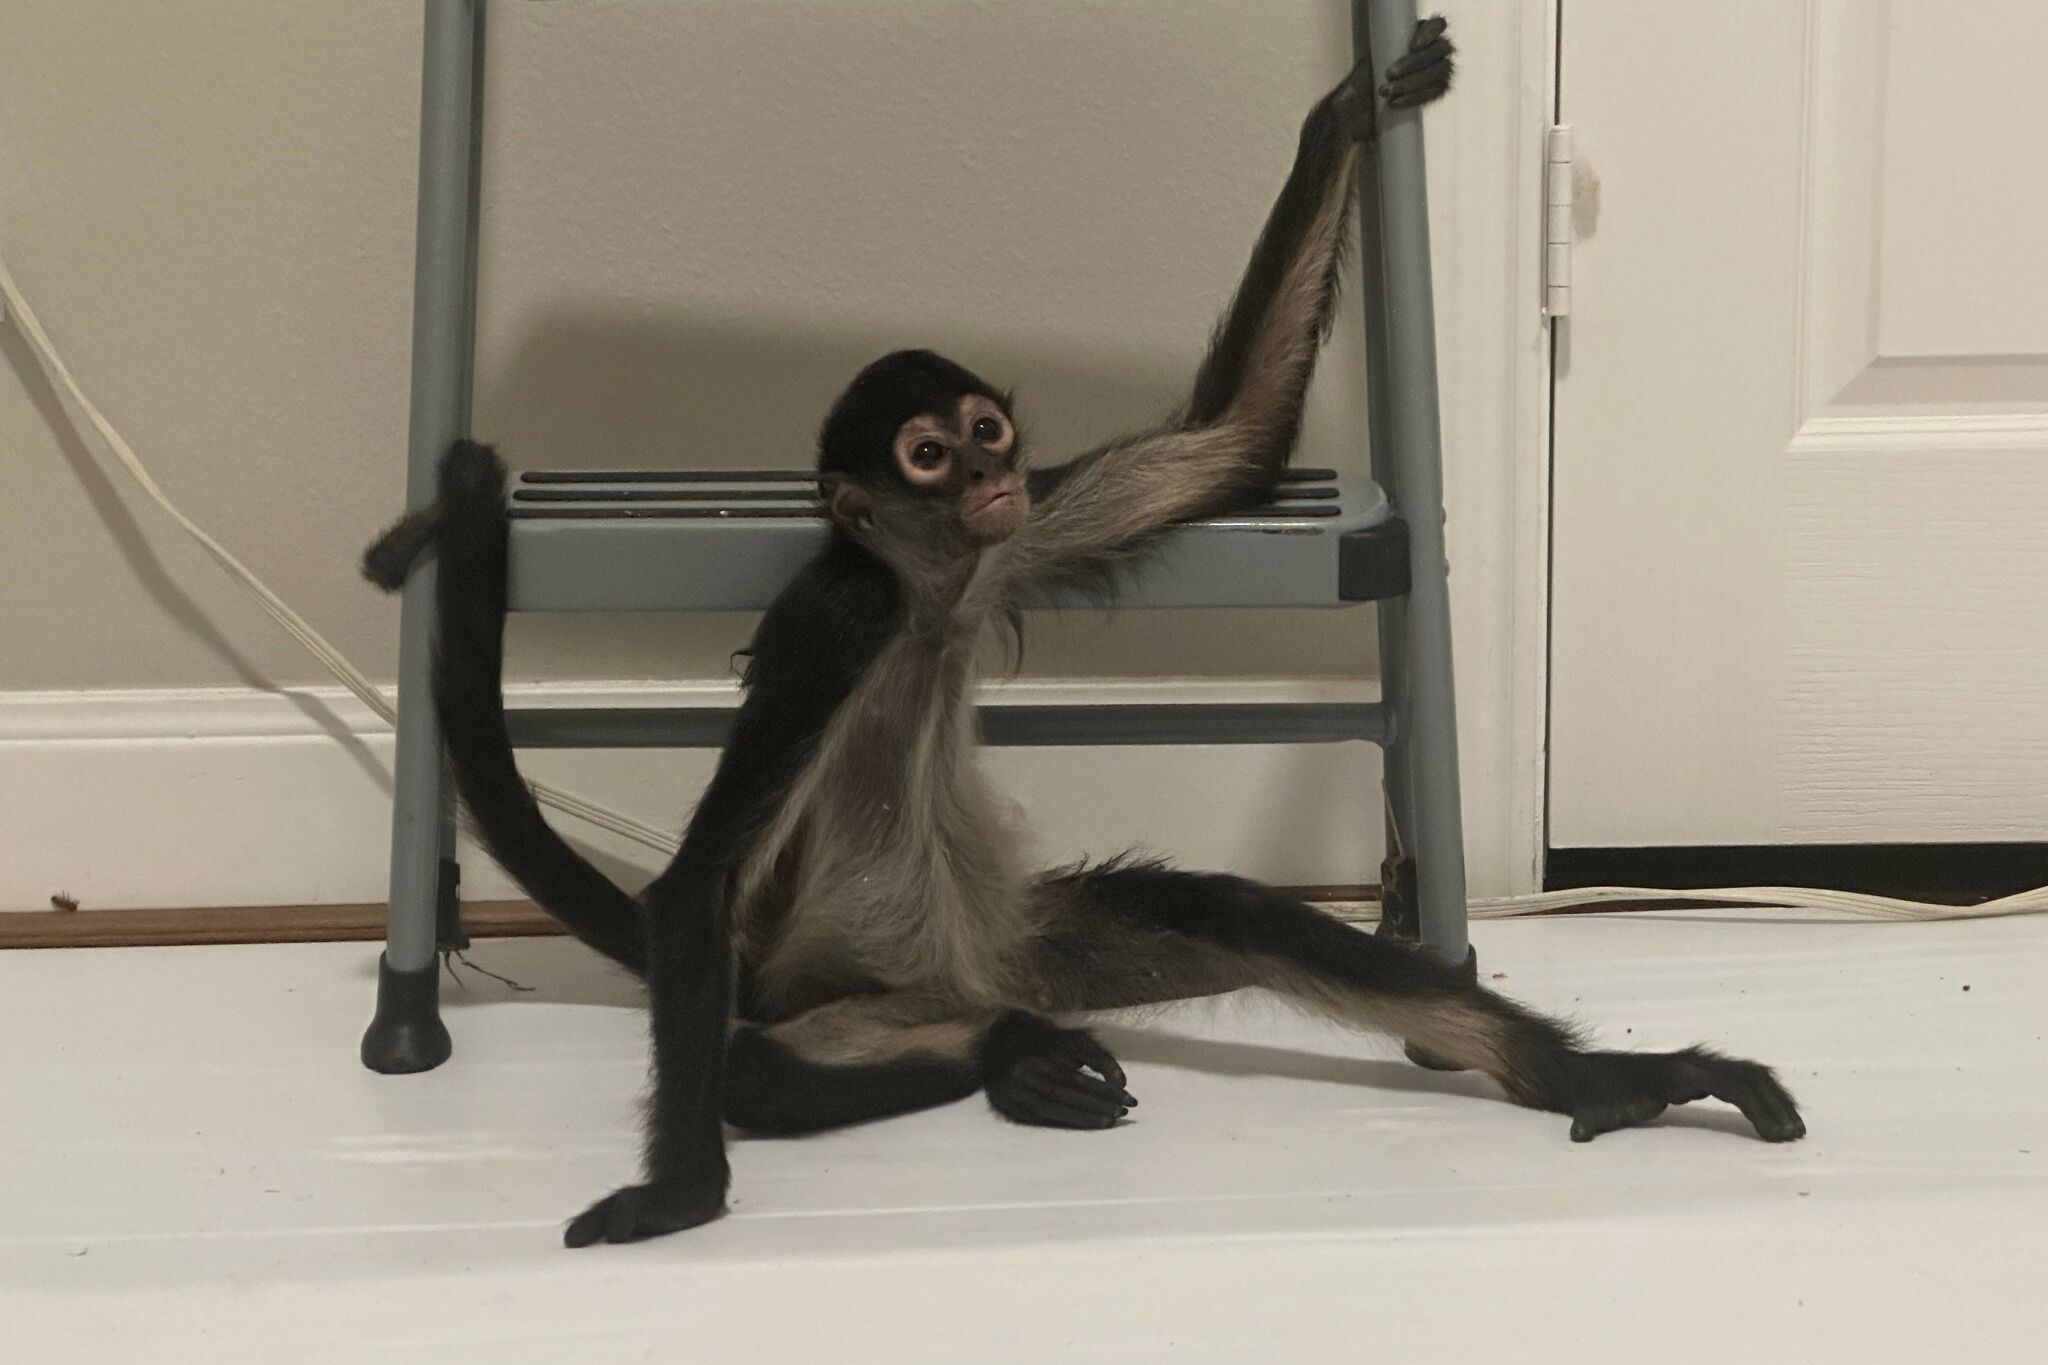 Houston spider monkey rescued from under truck after escape